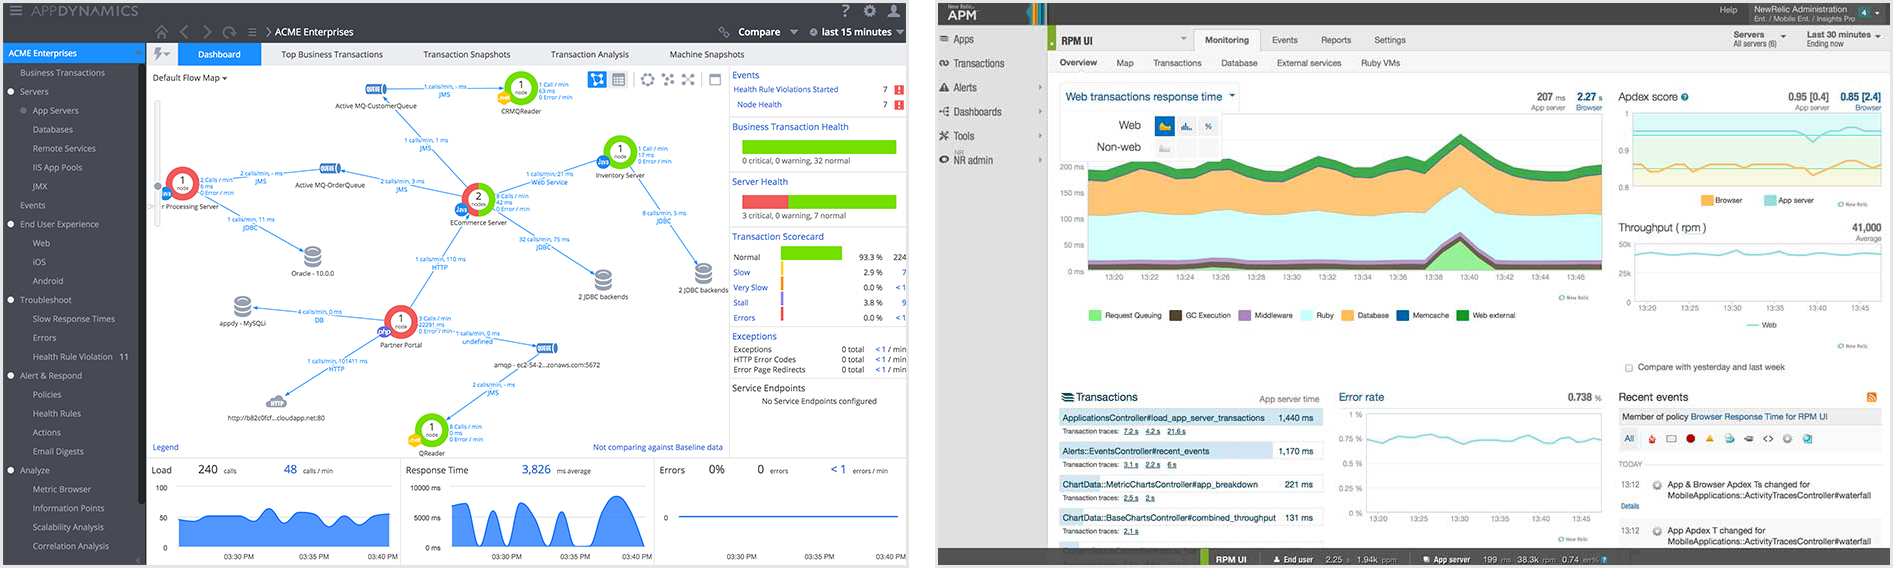 AppDynamics on the left, New Relic on the right – Main dashboard screen